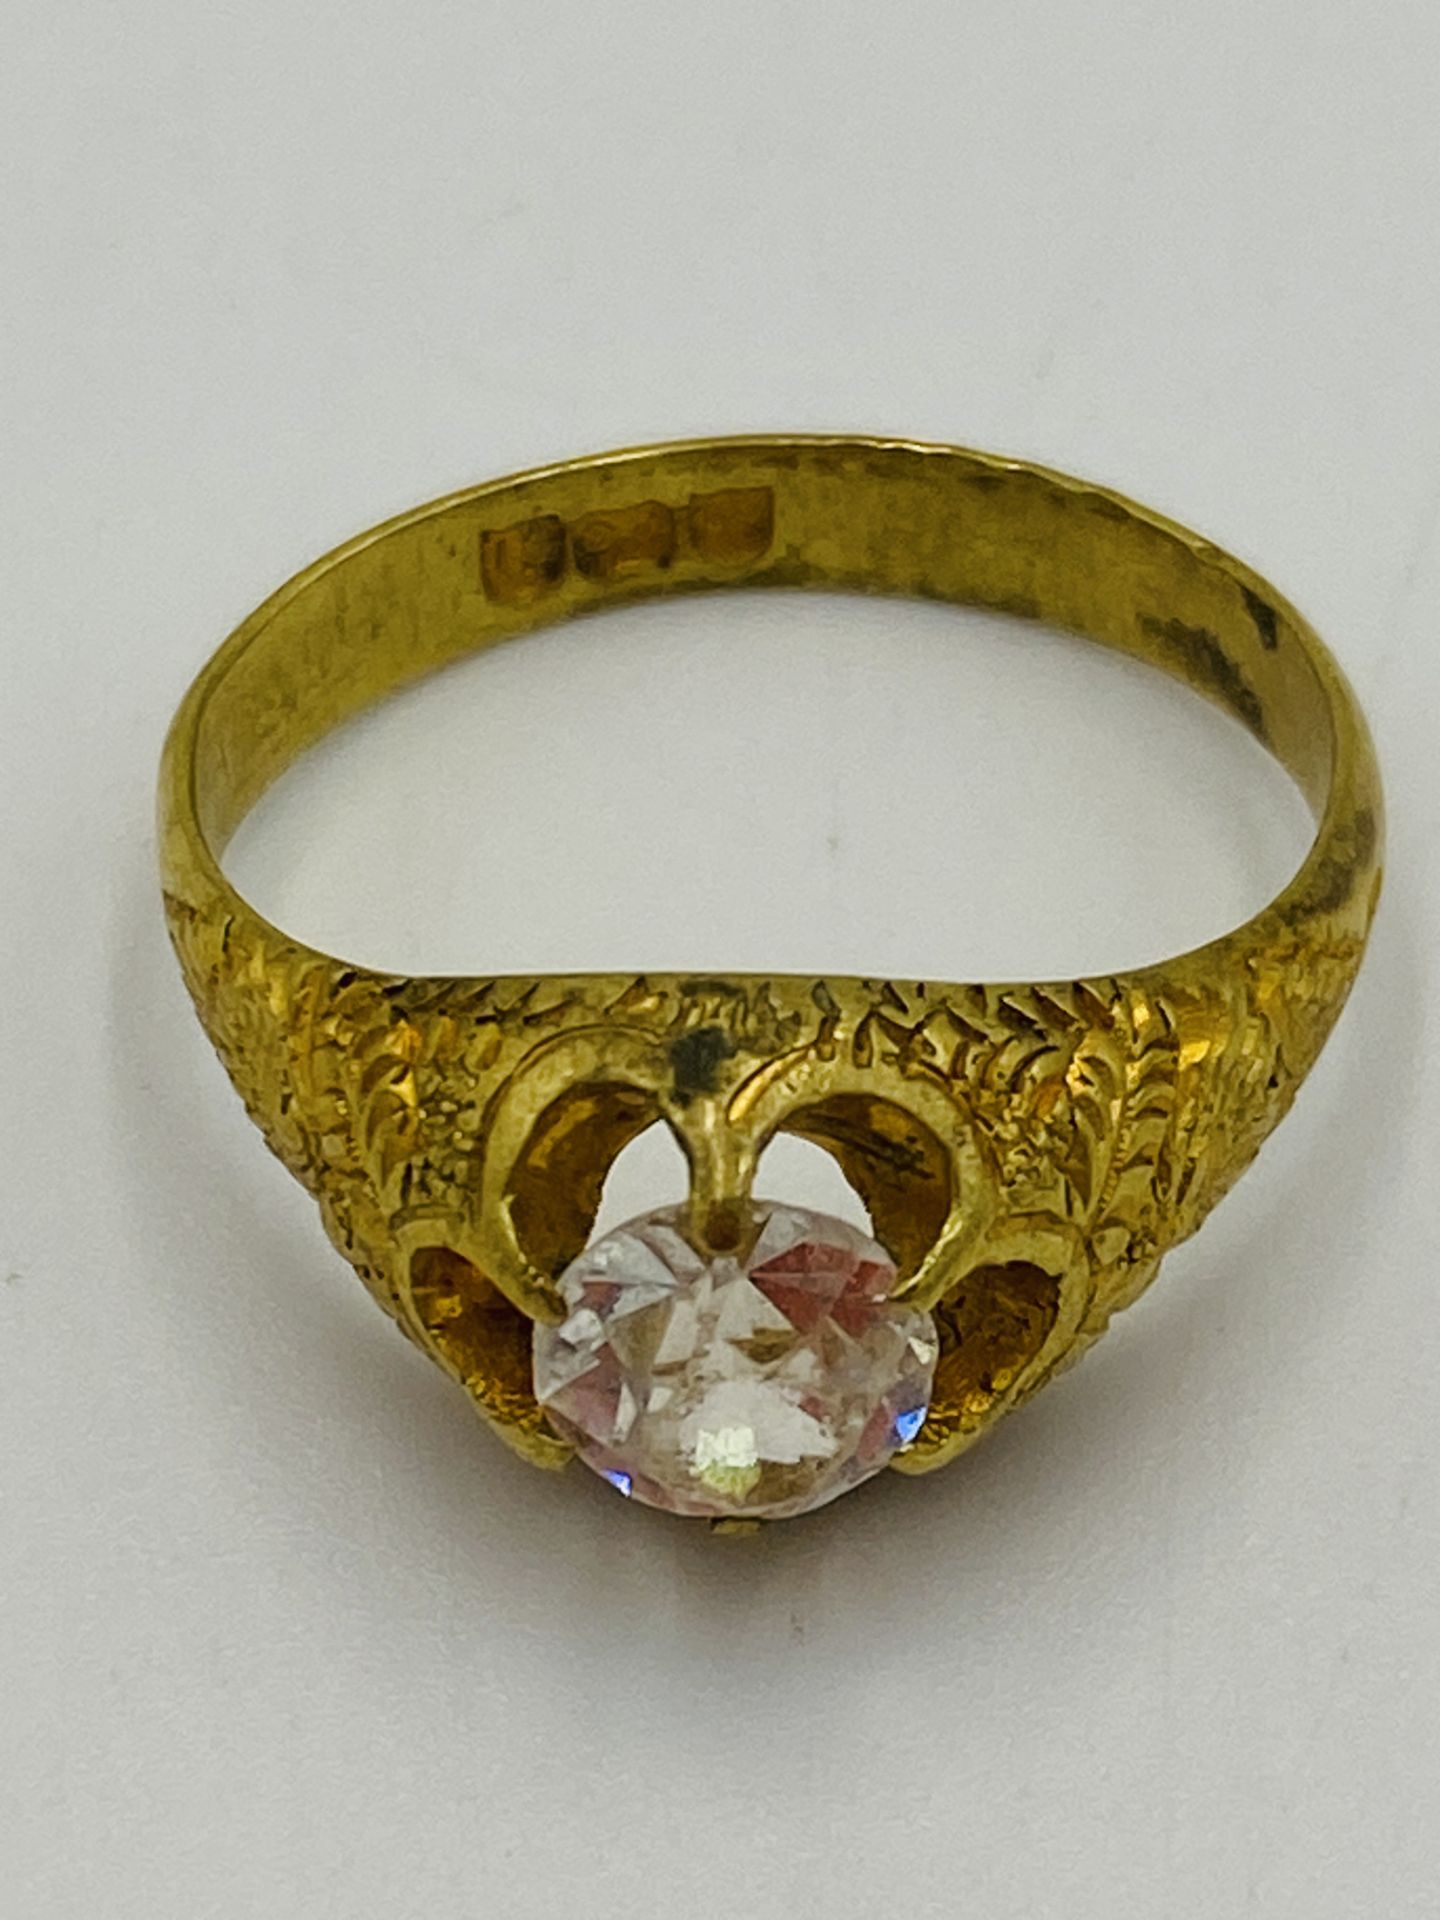 15ct gold ring together with a yellow metal ring - Image 2 of 5